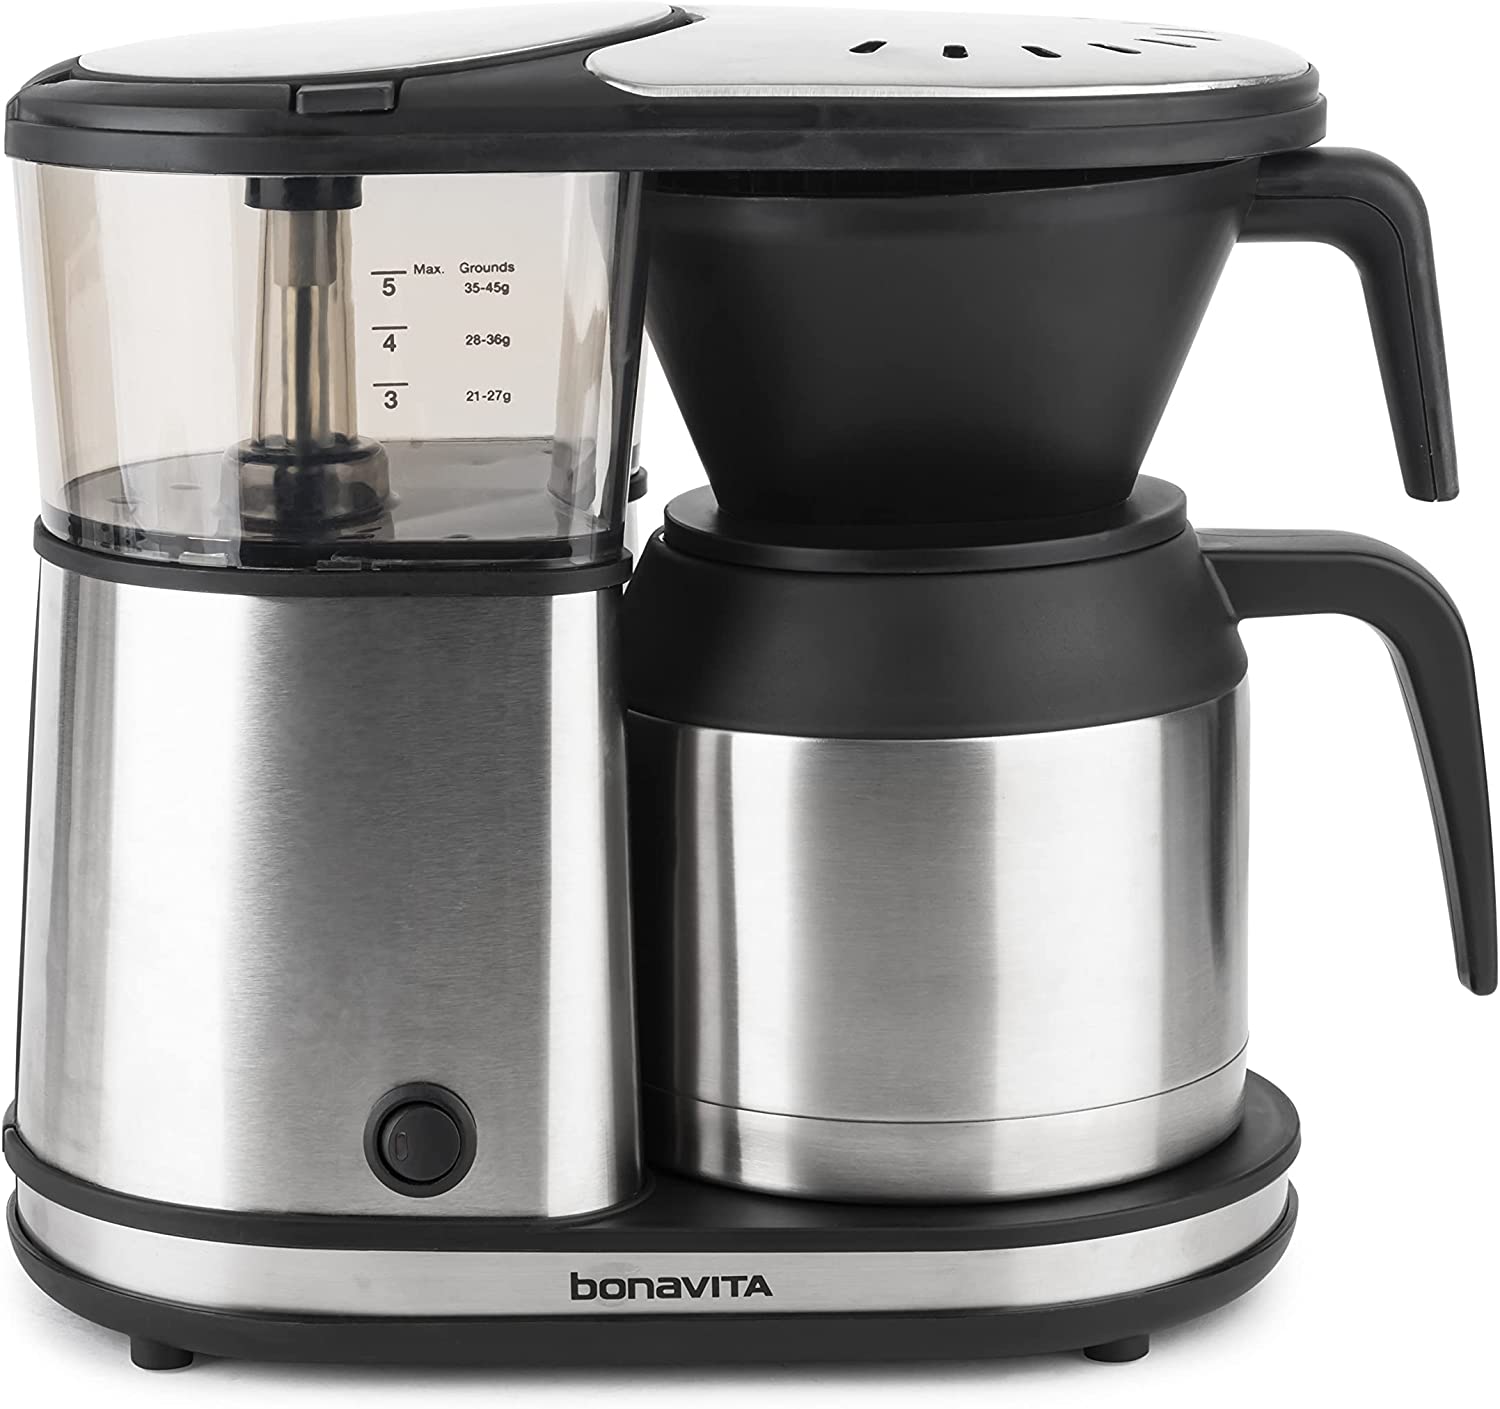 3. Bonavita 5-Cup One-Touch Coffee Maker, Model Number BV1500TS 